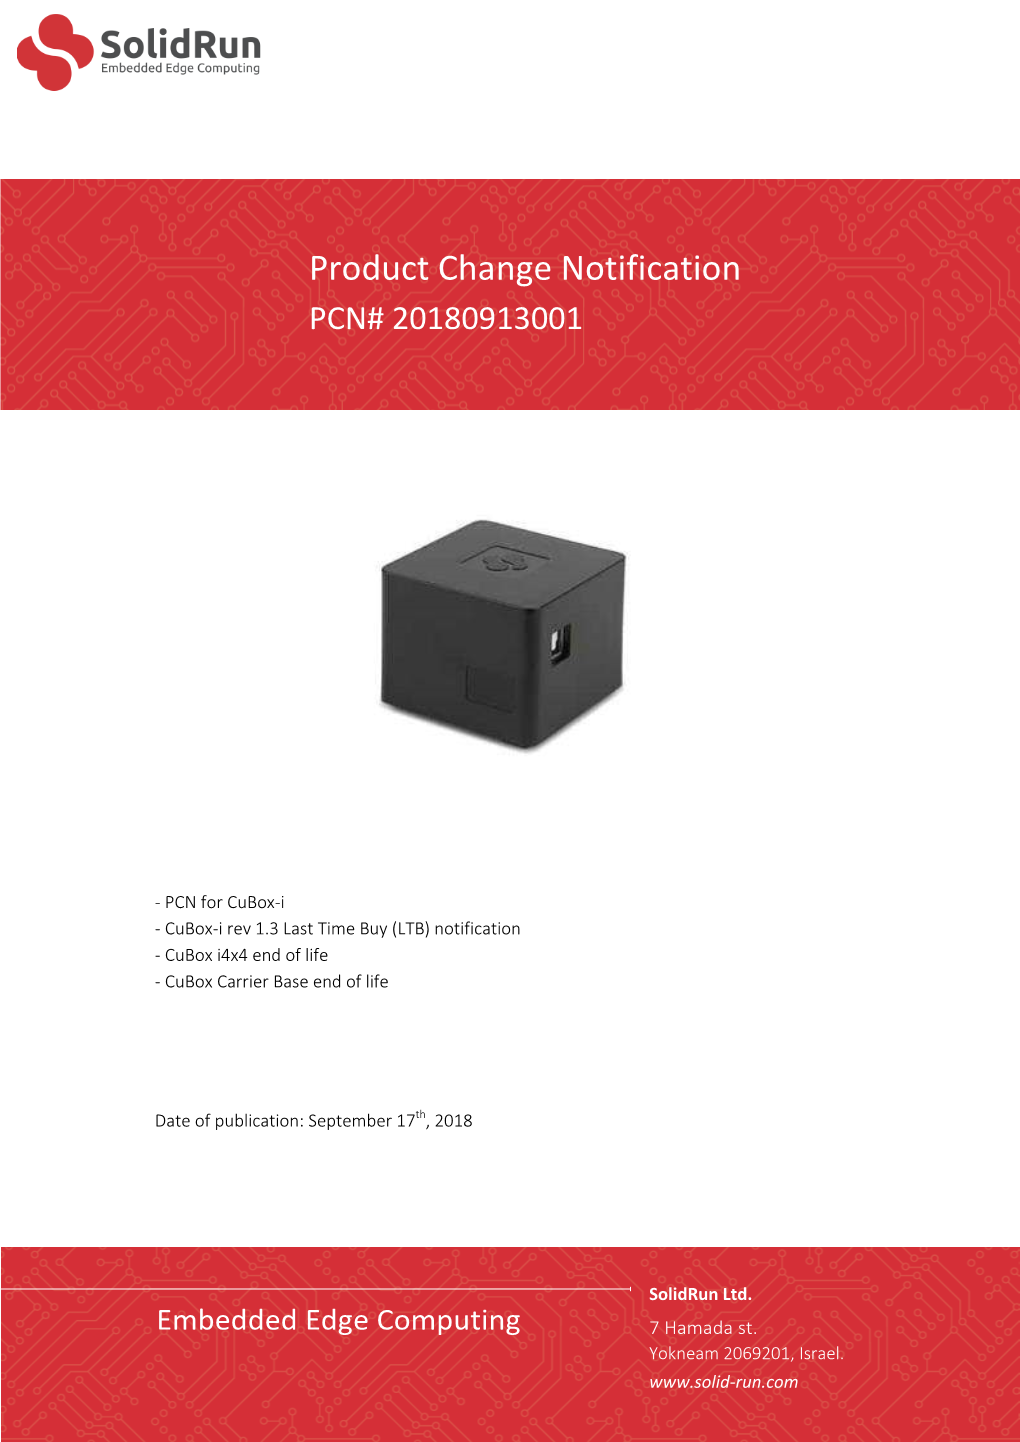 Product Change Notification PCN# 20180913001